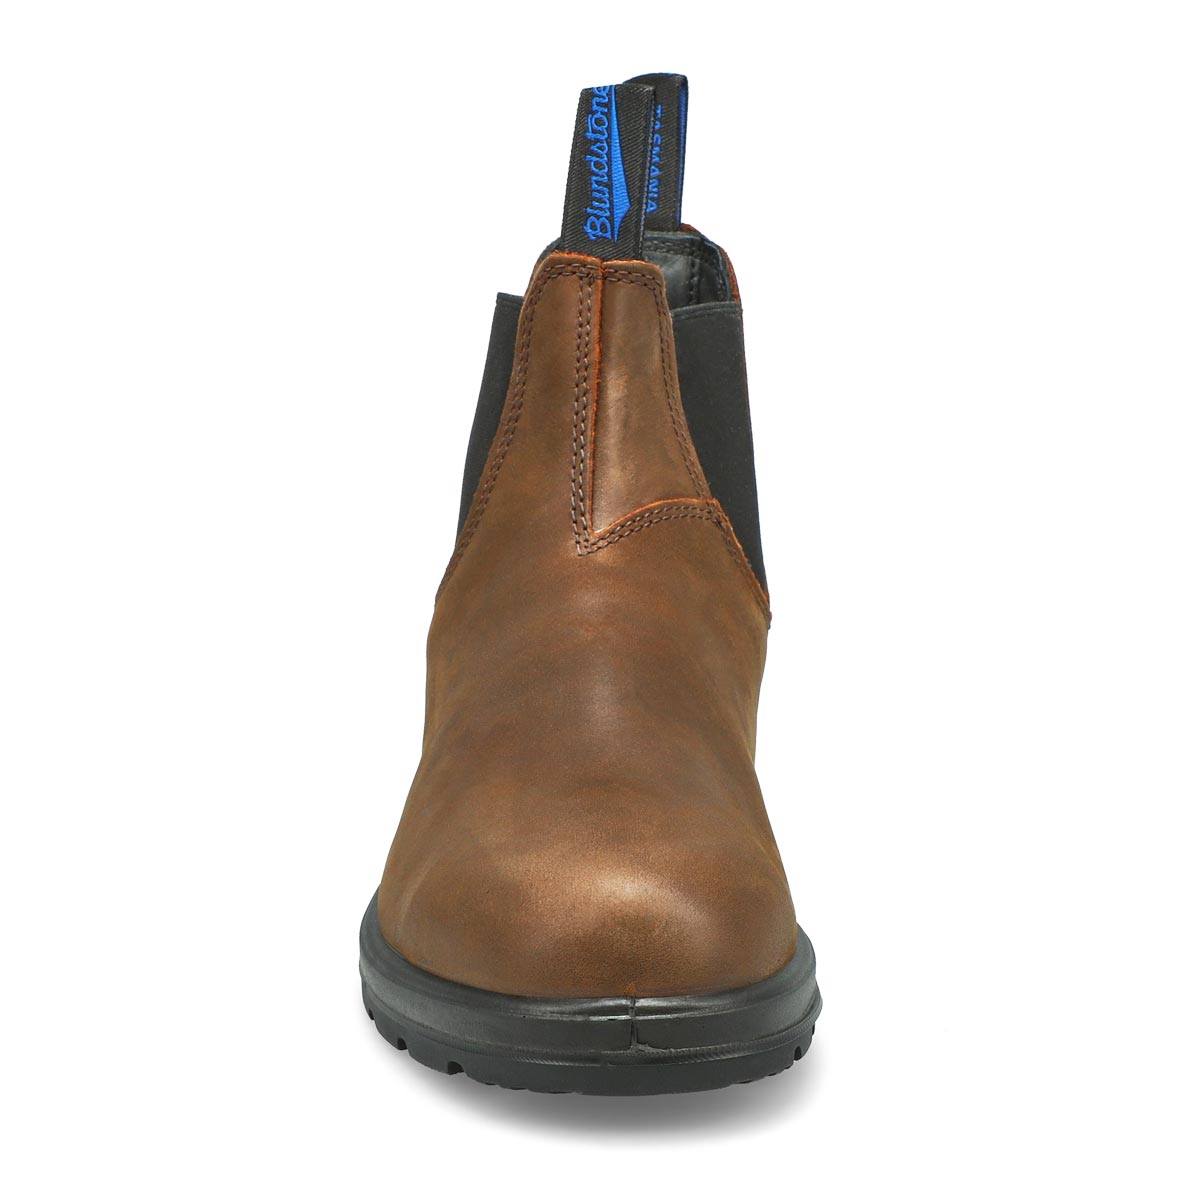 Unisex 1477 The Winter Lined Waterproof Boot